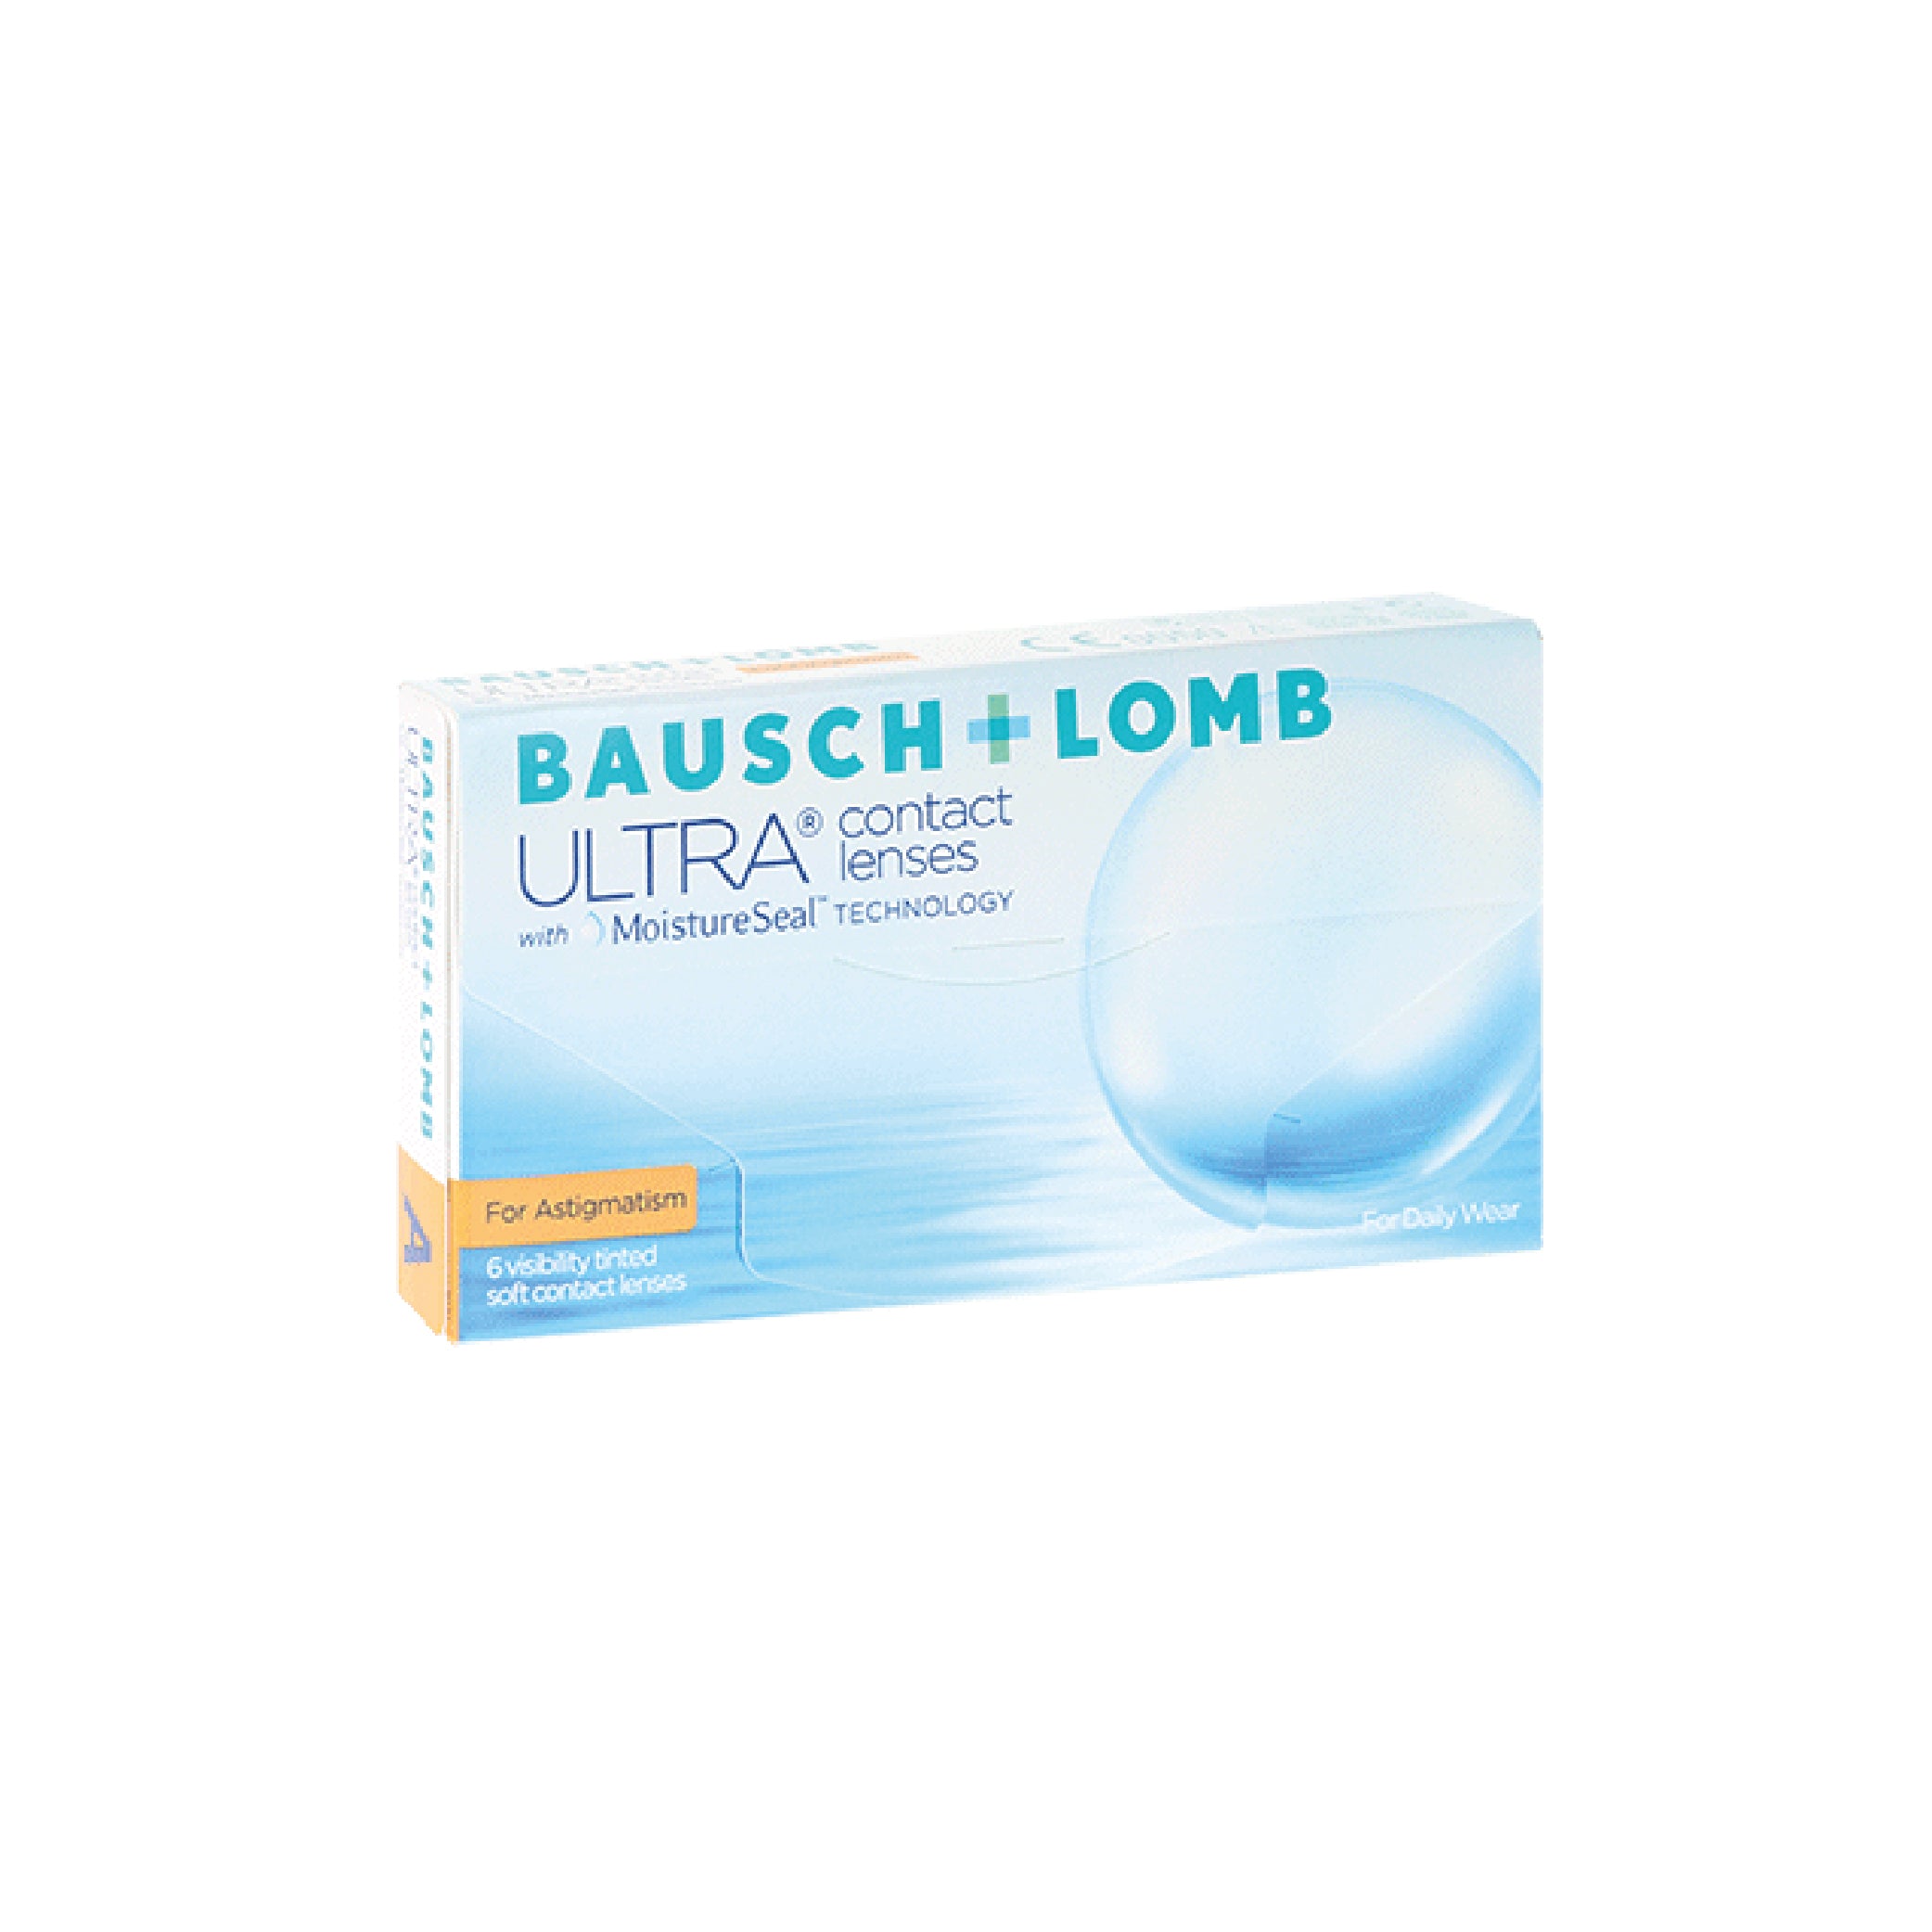 Bausch & Lomb Ultra Astigmatism Monthly (6 PCS)